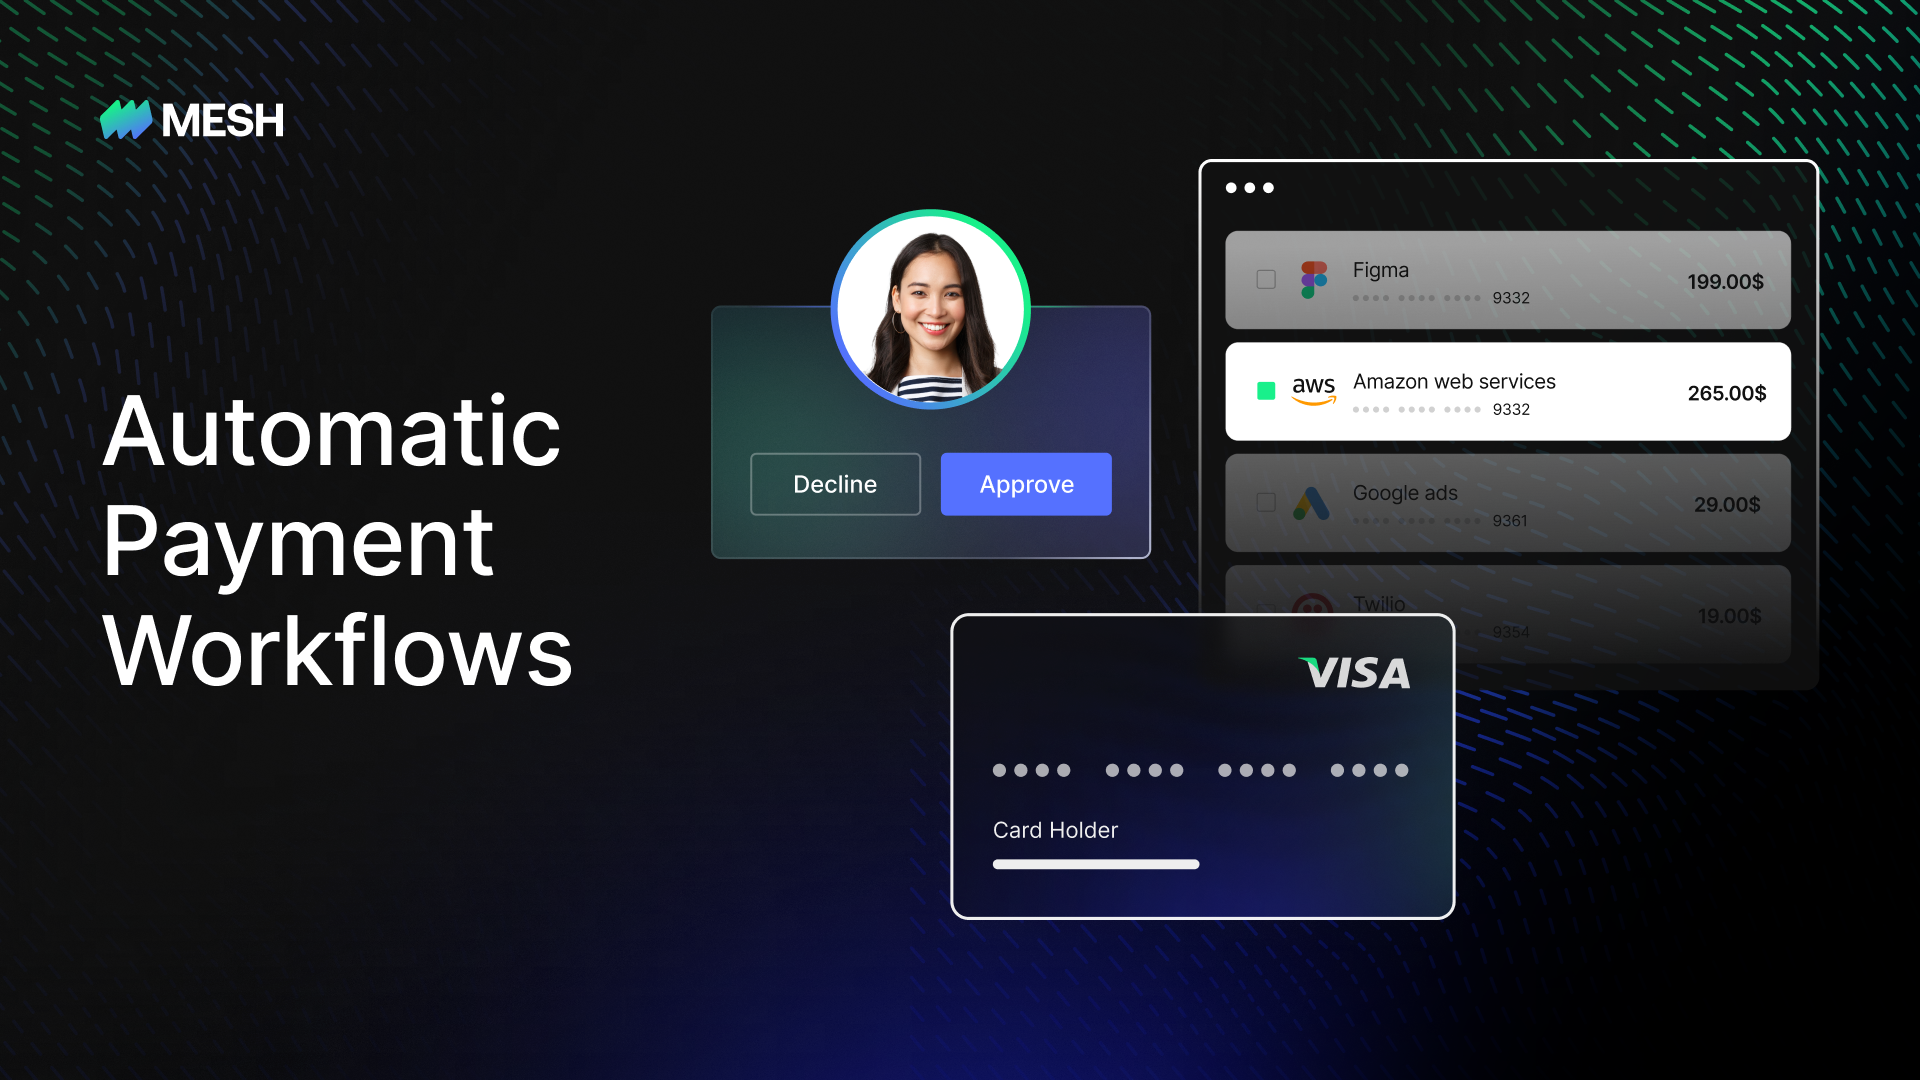 Automate your company payment workflow to save time and hassle. From approval flows, automatic receipt matching, to modern integrations, and more.